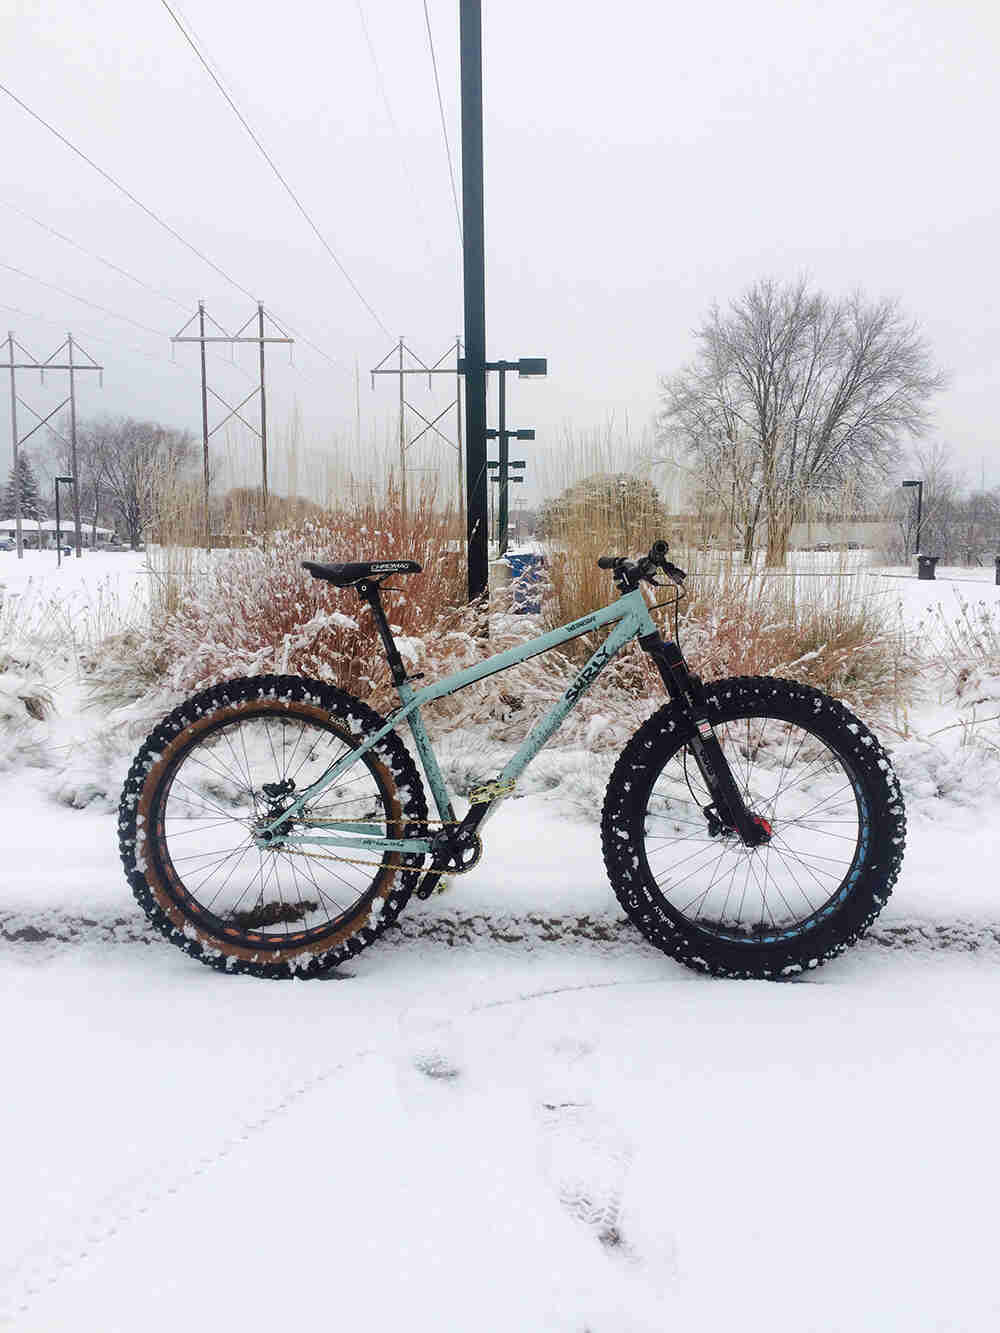 Right side view of a mint green Surly Wednesday fat bike, parked in snow, with power lines in the background